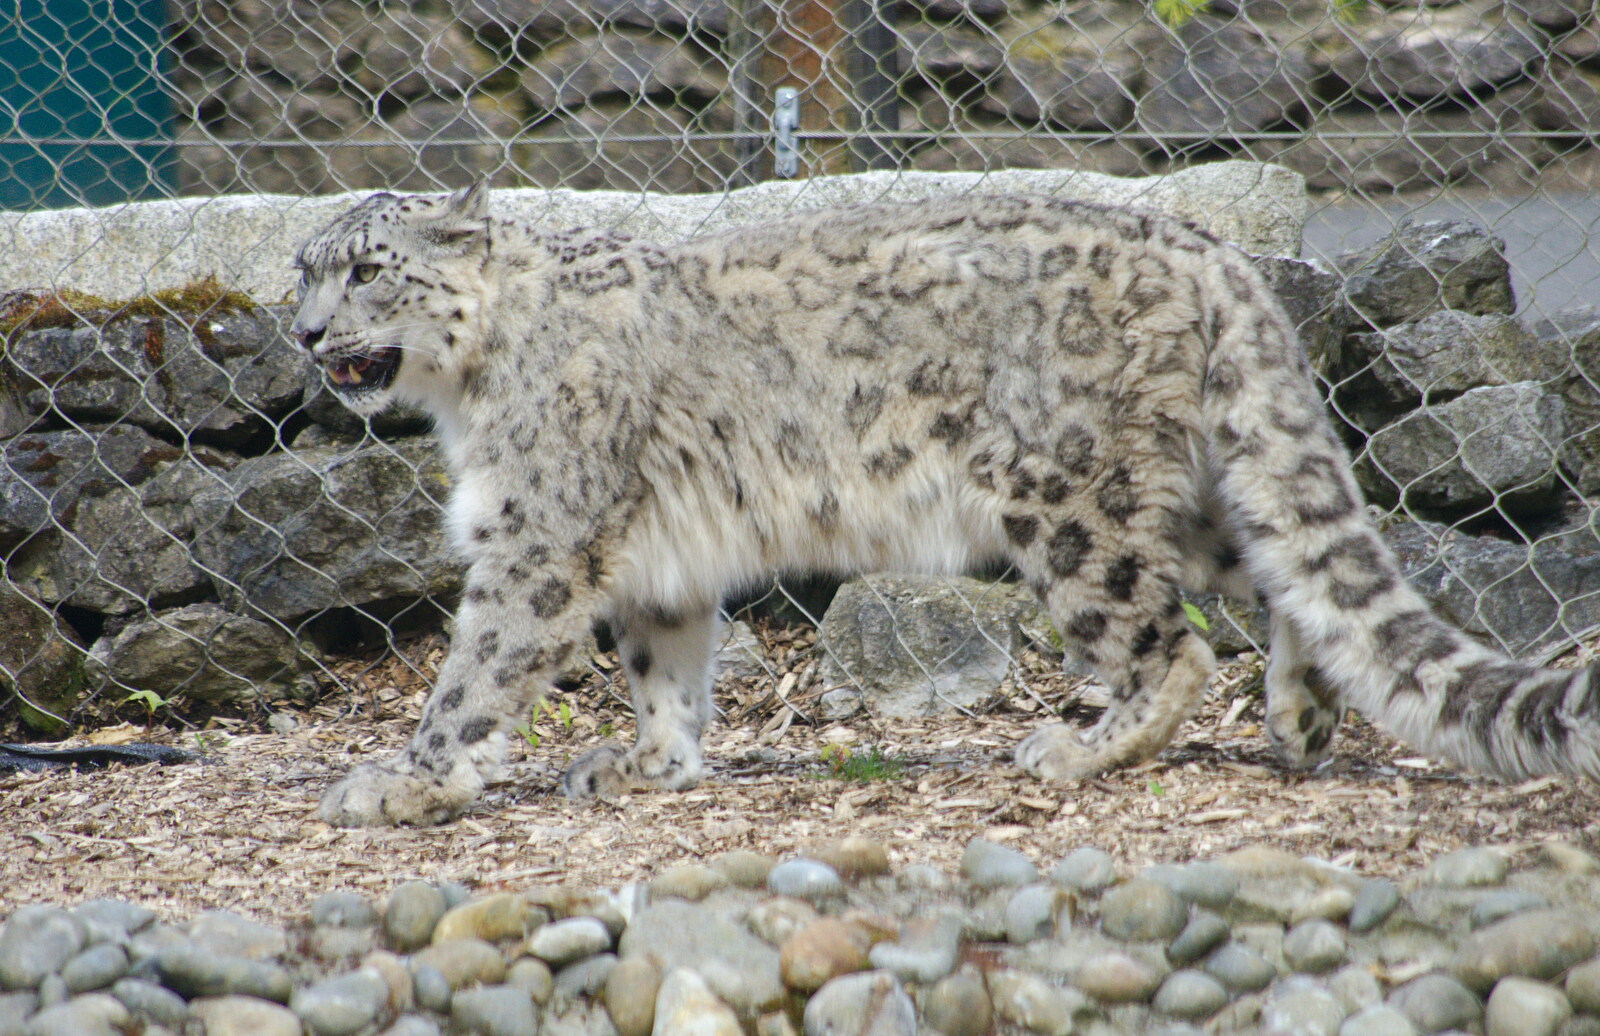 A Snow Leopard paces around from A Birthday Trip to the Zoo, Banham, Norfolk - 26th May 2014